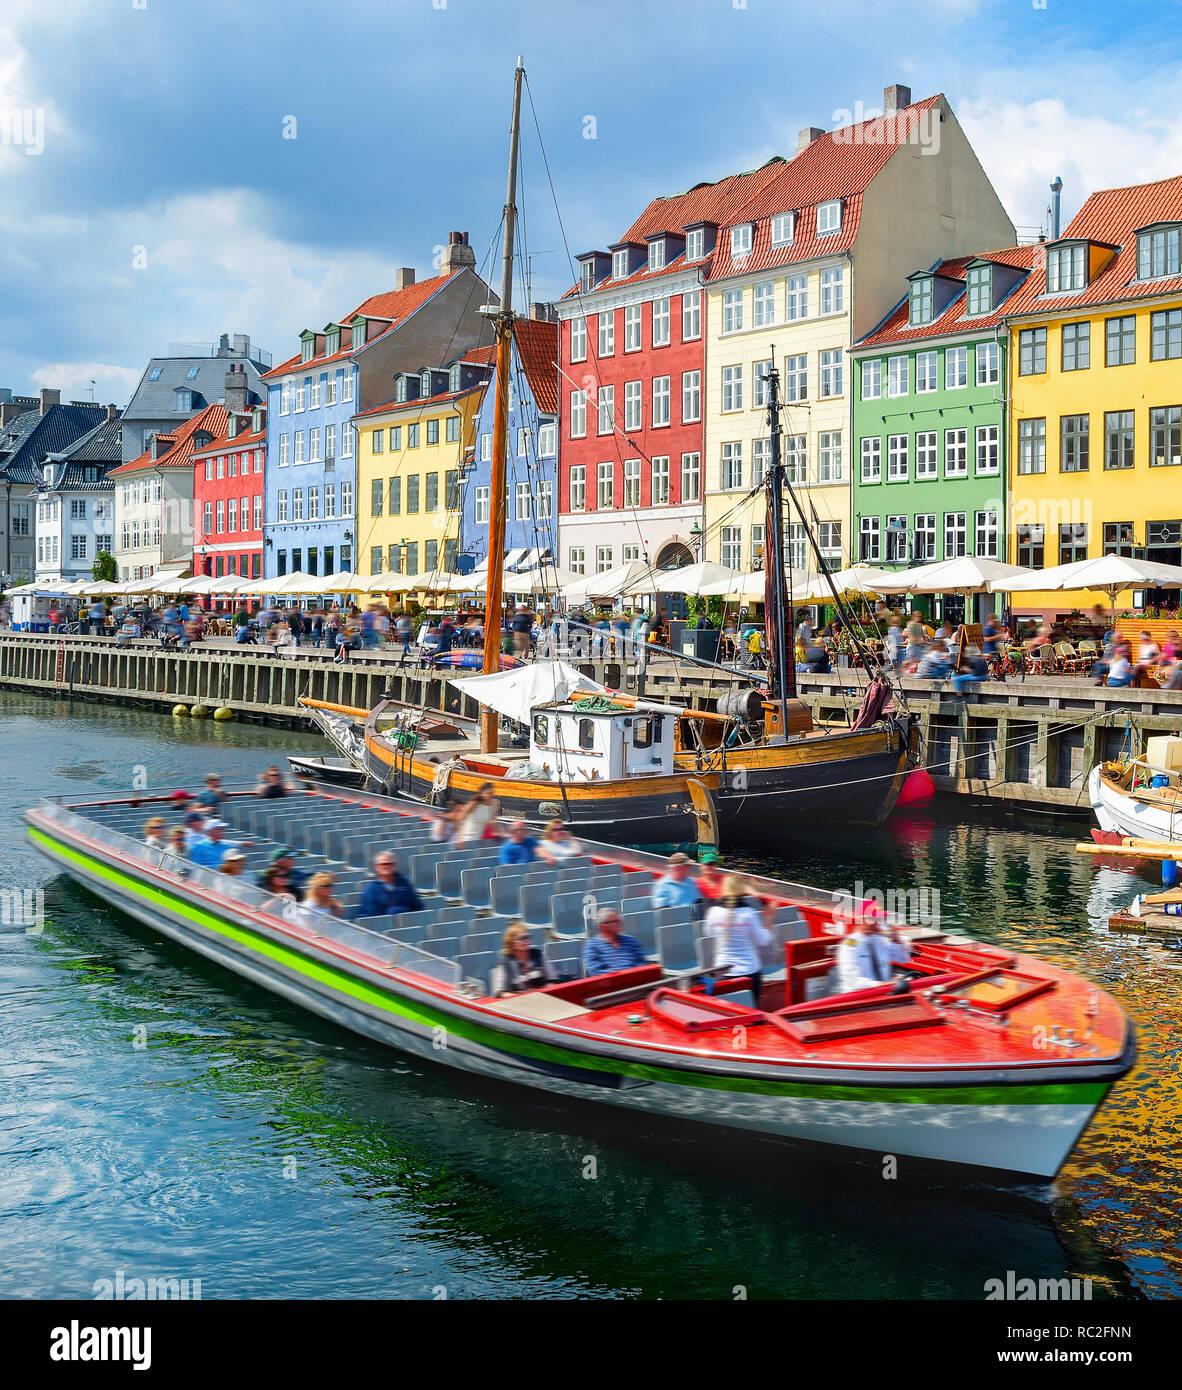 Tourists sightseeing cruising on boat by Nyhavn embankment with bars and restaurants in buildings of old architecture, Copenhagen, Denmark Stock Photo